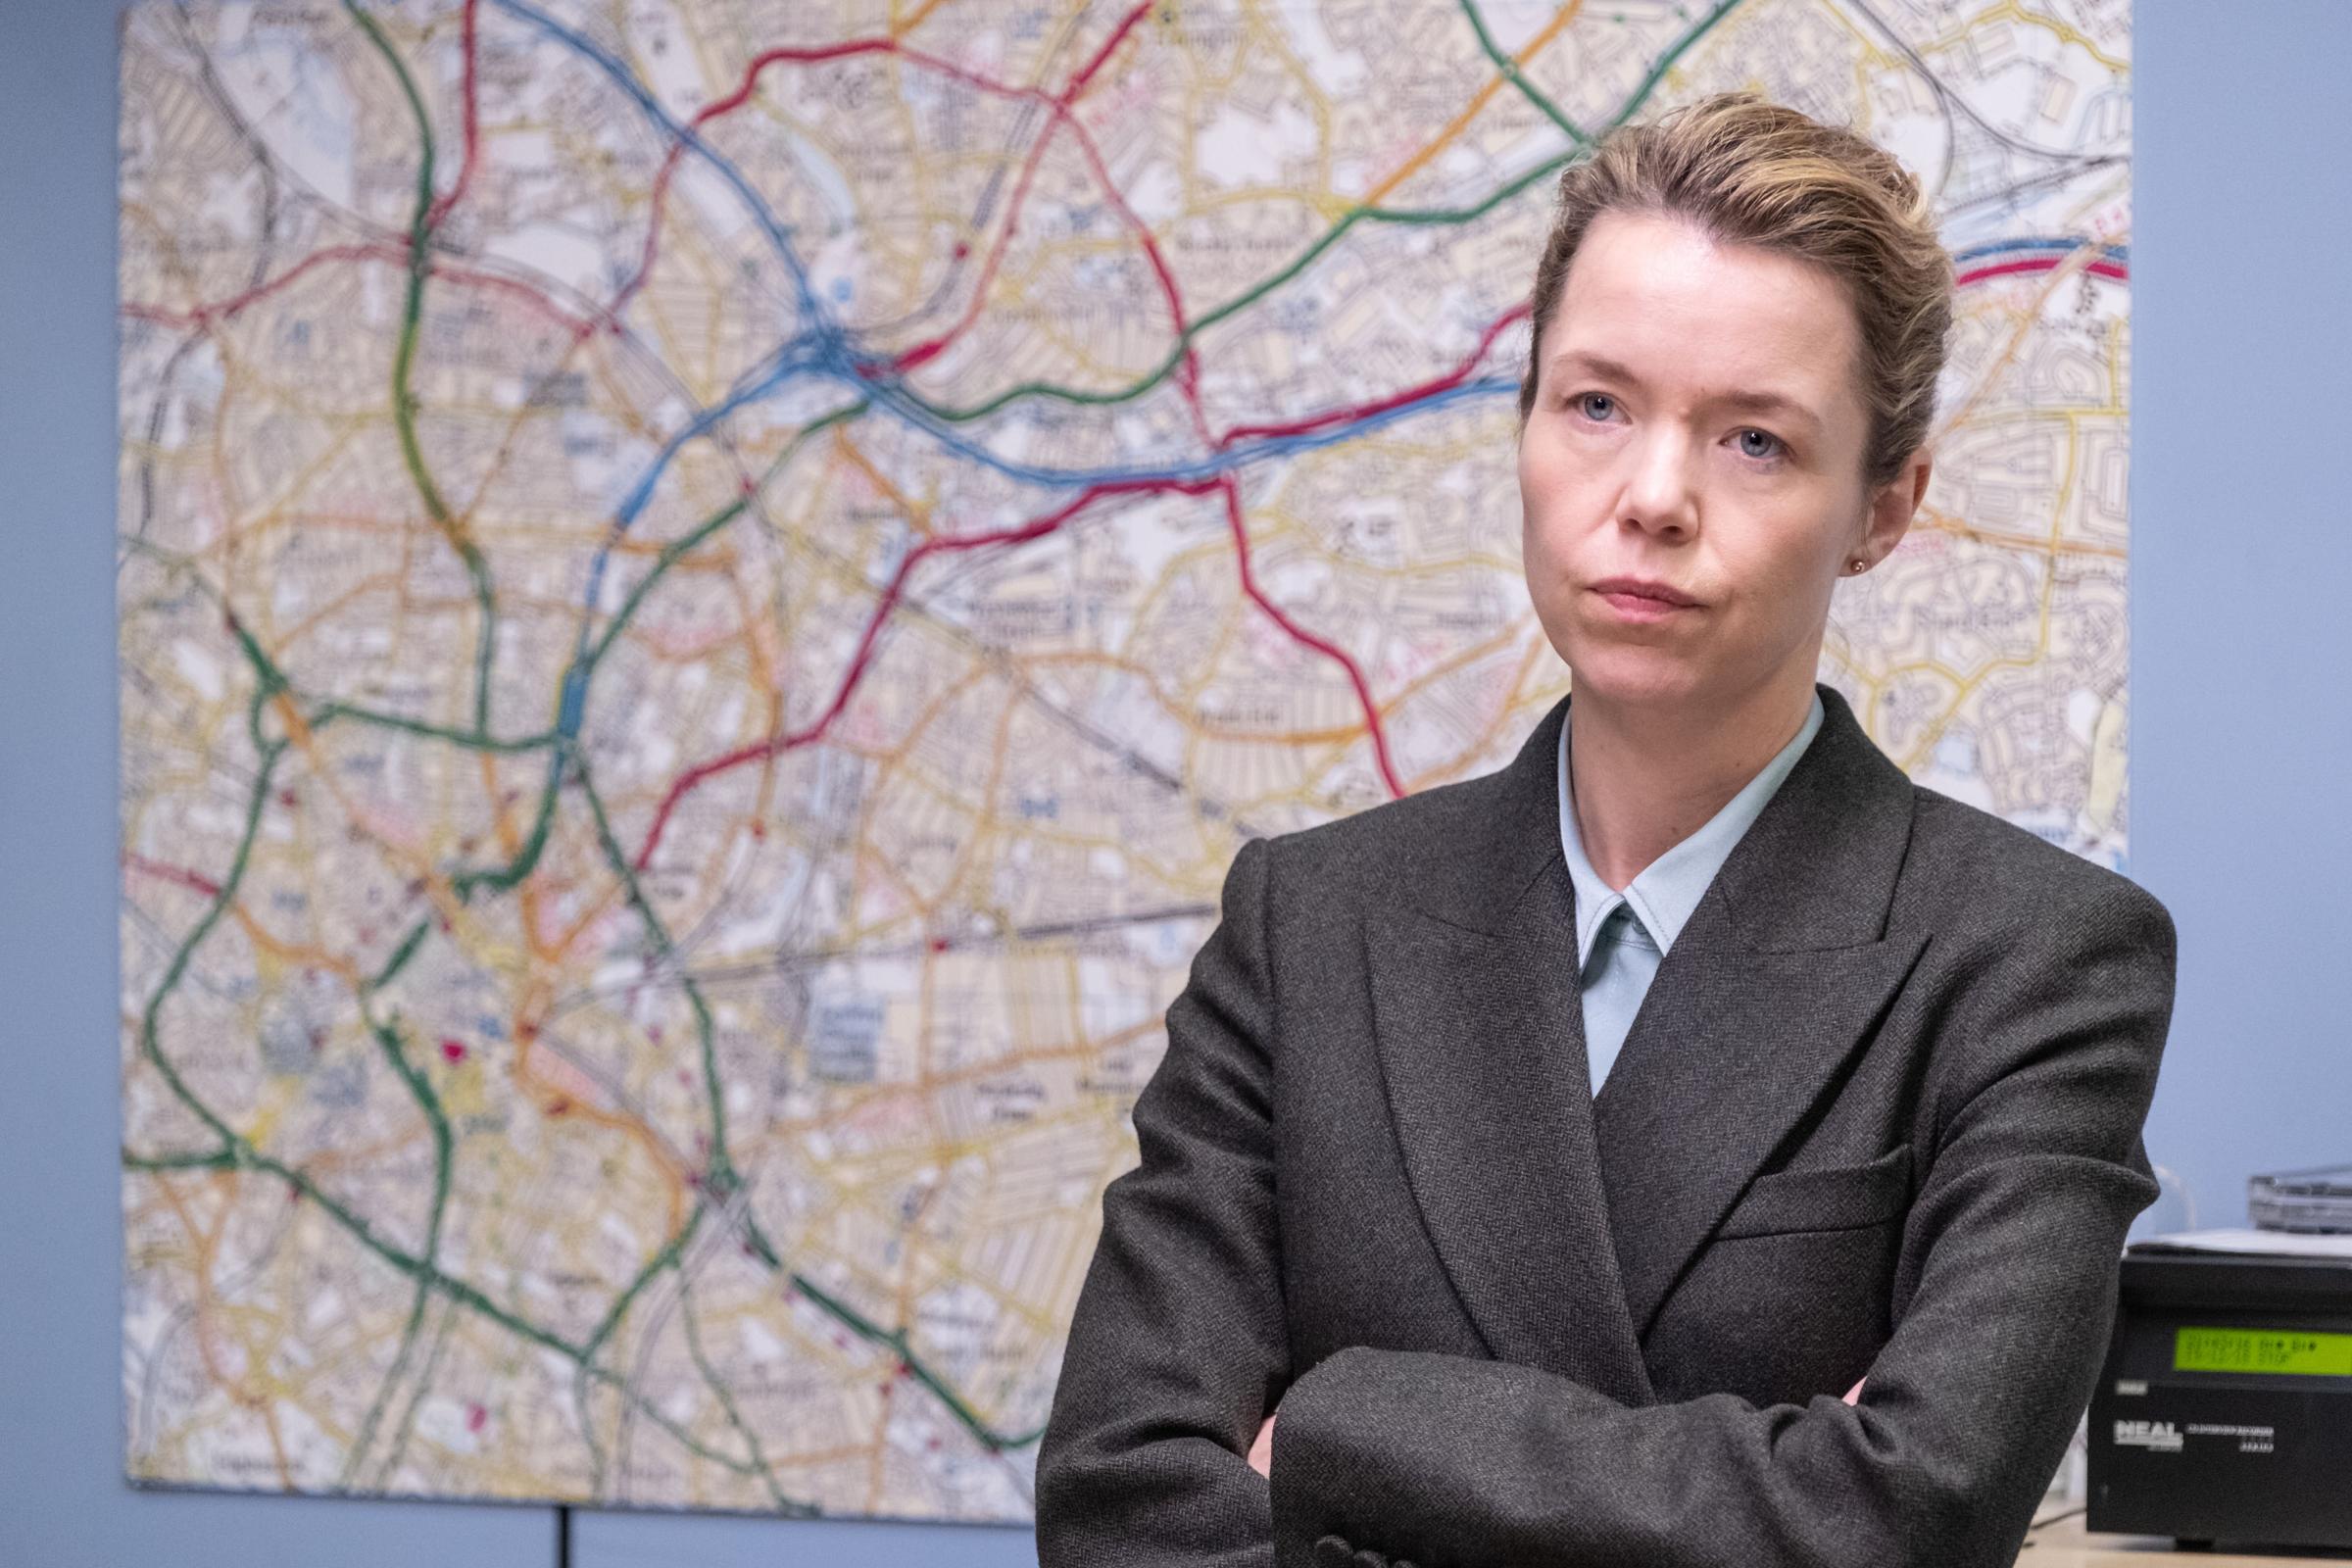 Anna Maxwell Martin ‘dead chuffed’ to join Line Of Duty for remainder of series